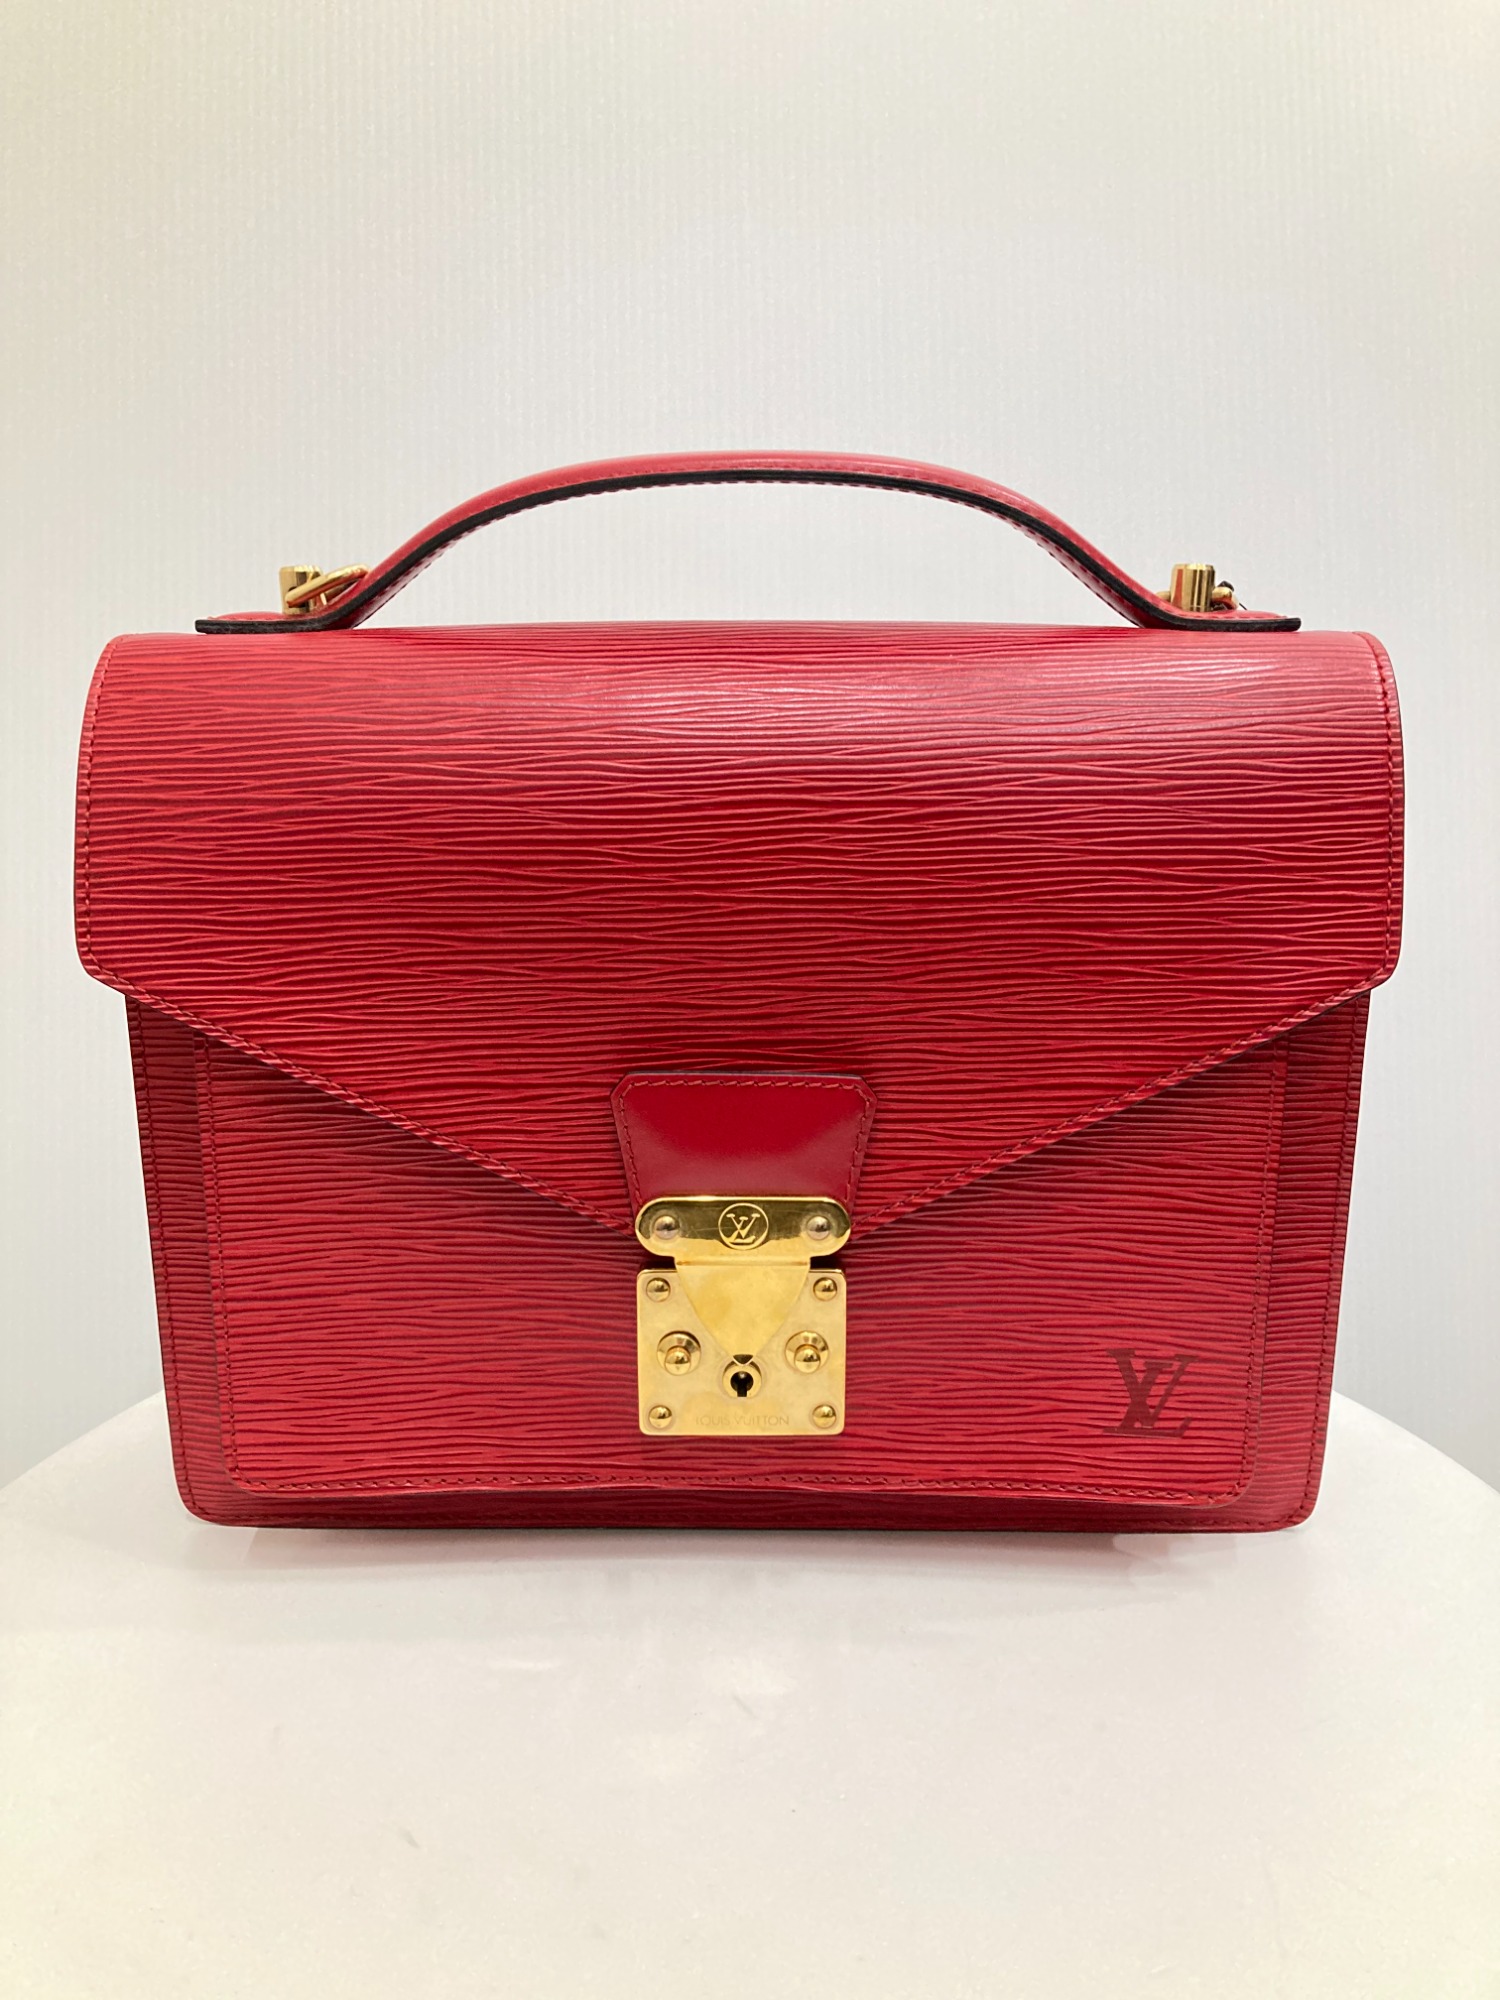 LOUIS VUITTON/ルイヴィトン】モンソー2wayバッグを買取入荷致しました 